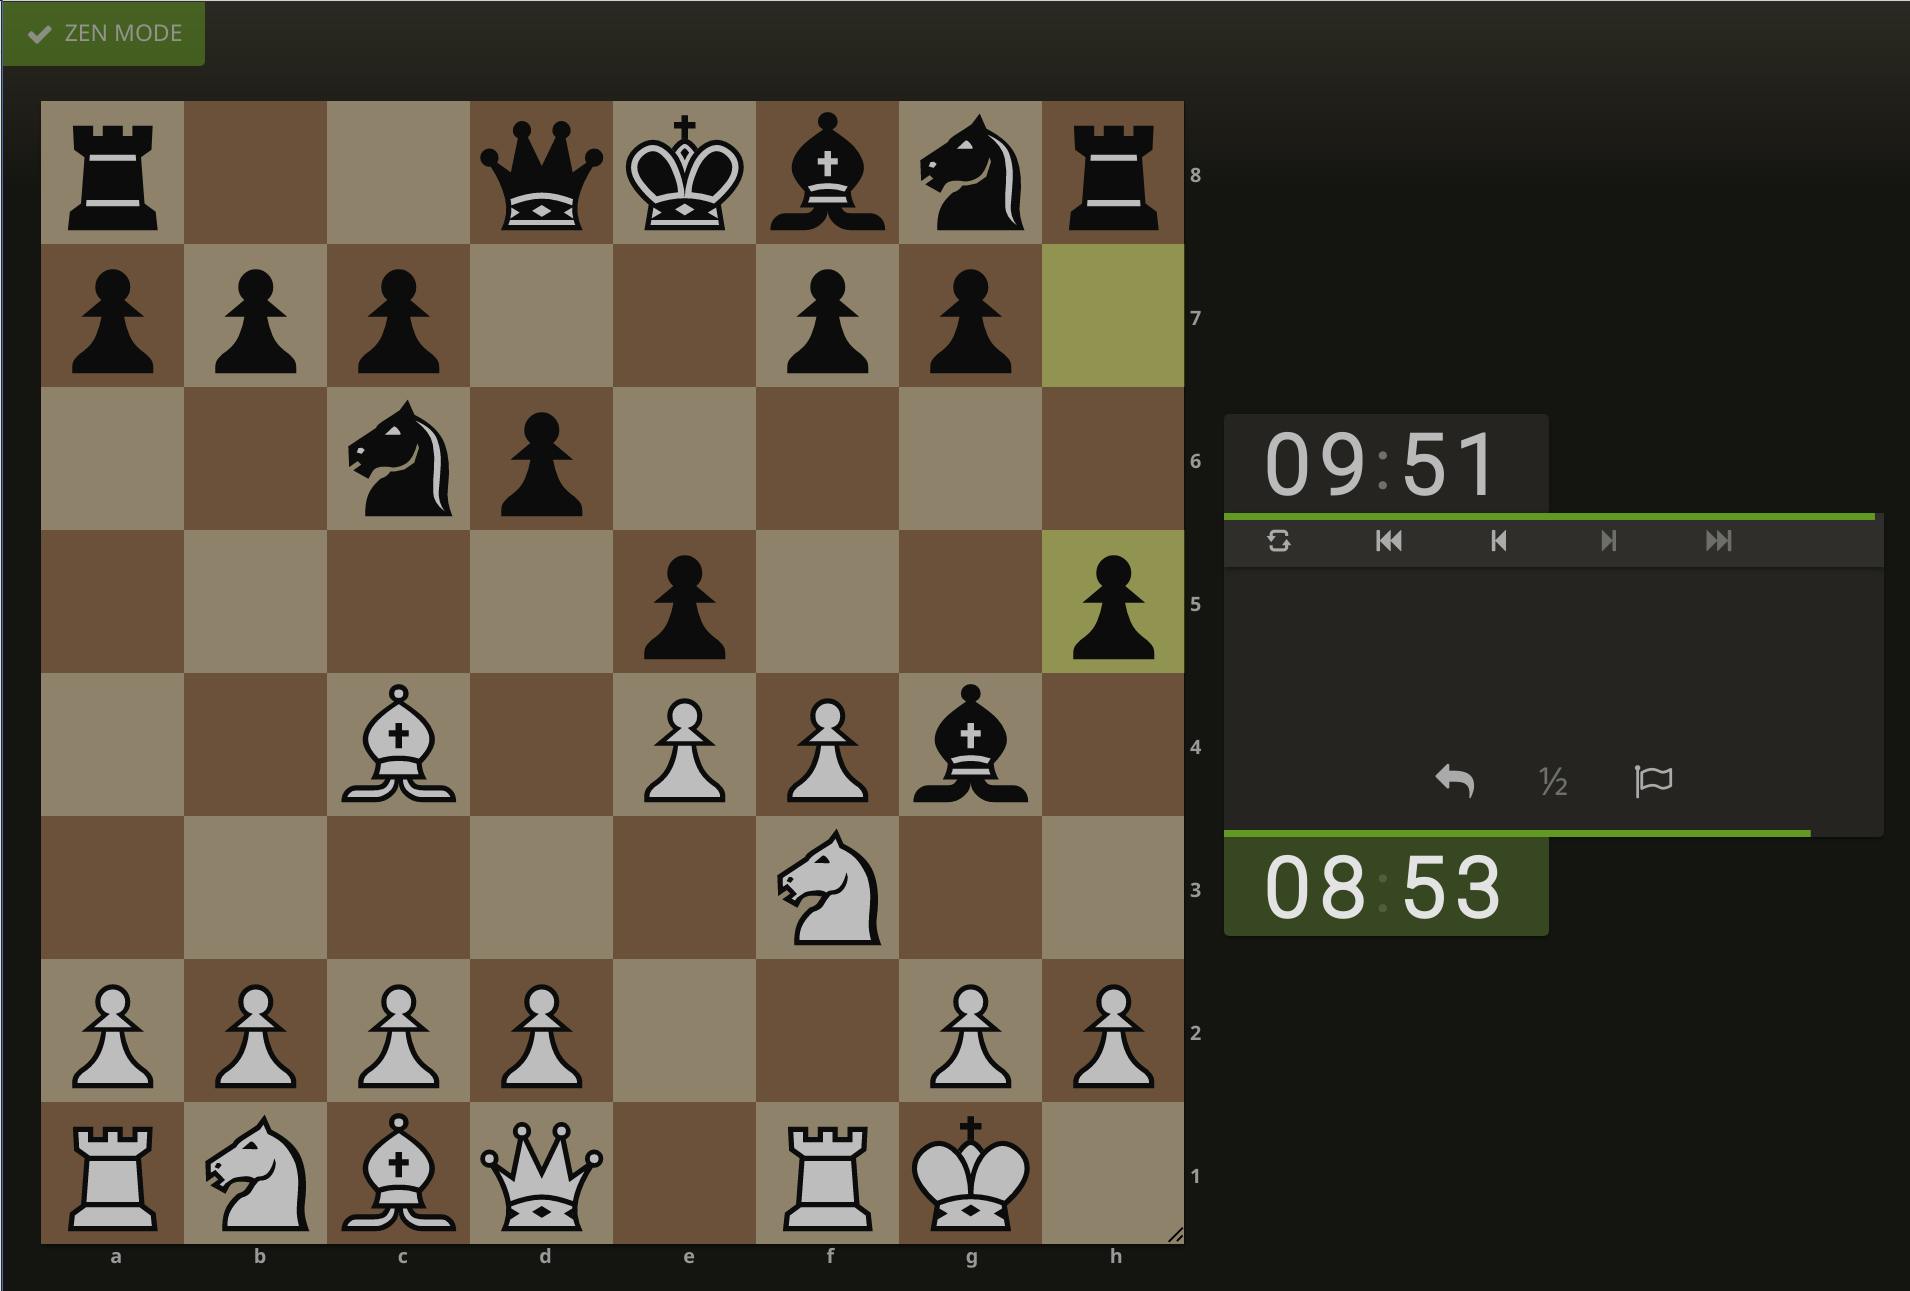 lichess.org - New feature: Zen mode hides your opponent's rating